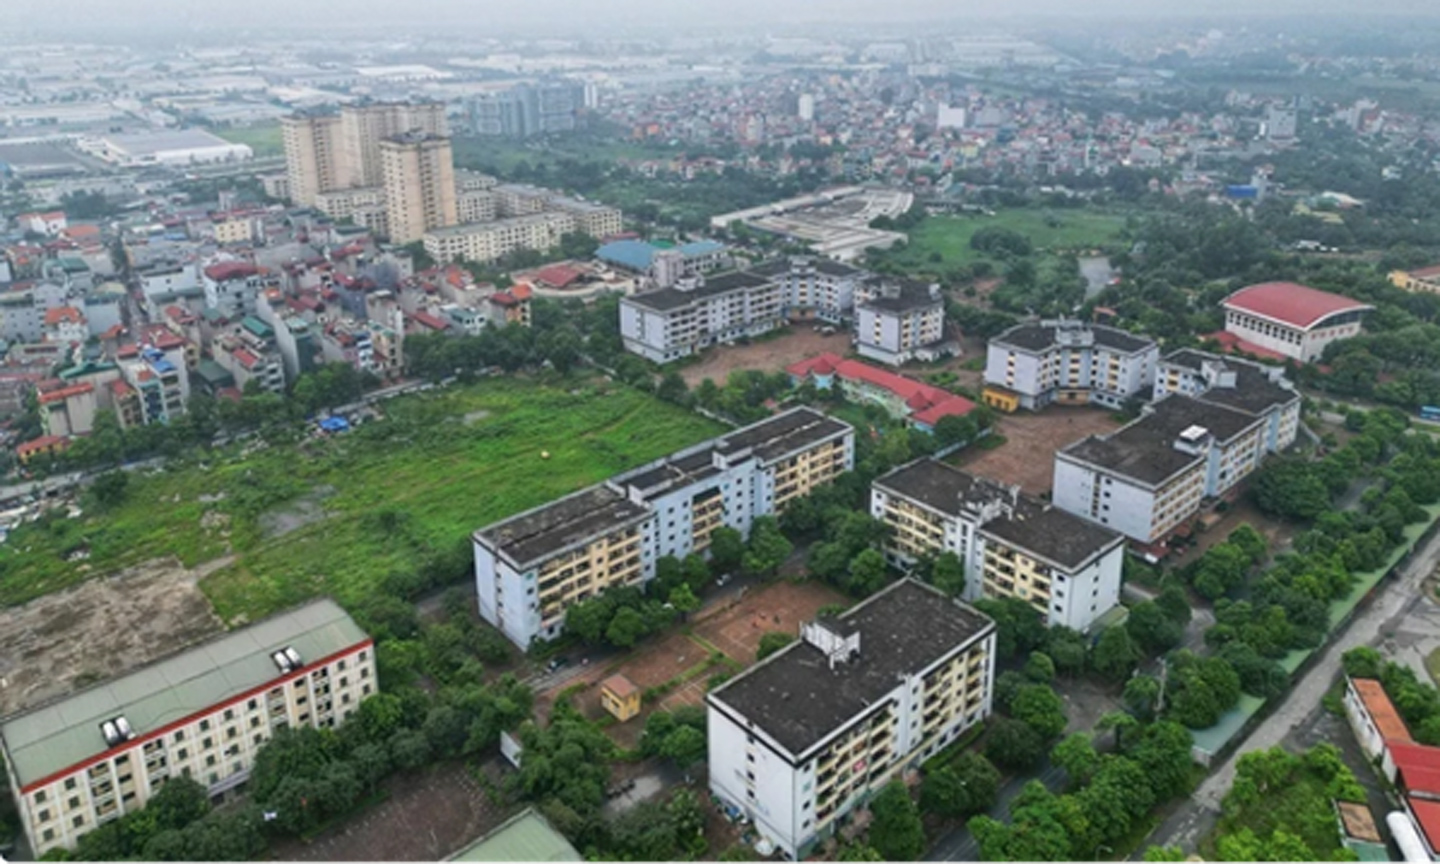 ABO/NDO- An estimated 866.8 million USD in foreign direct investment (FDI) was channelled into Hanoi in January, the municipal Statistics Office reported.